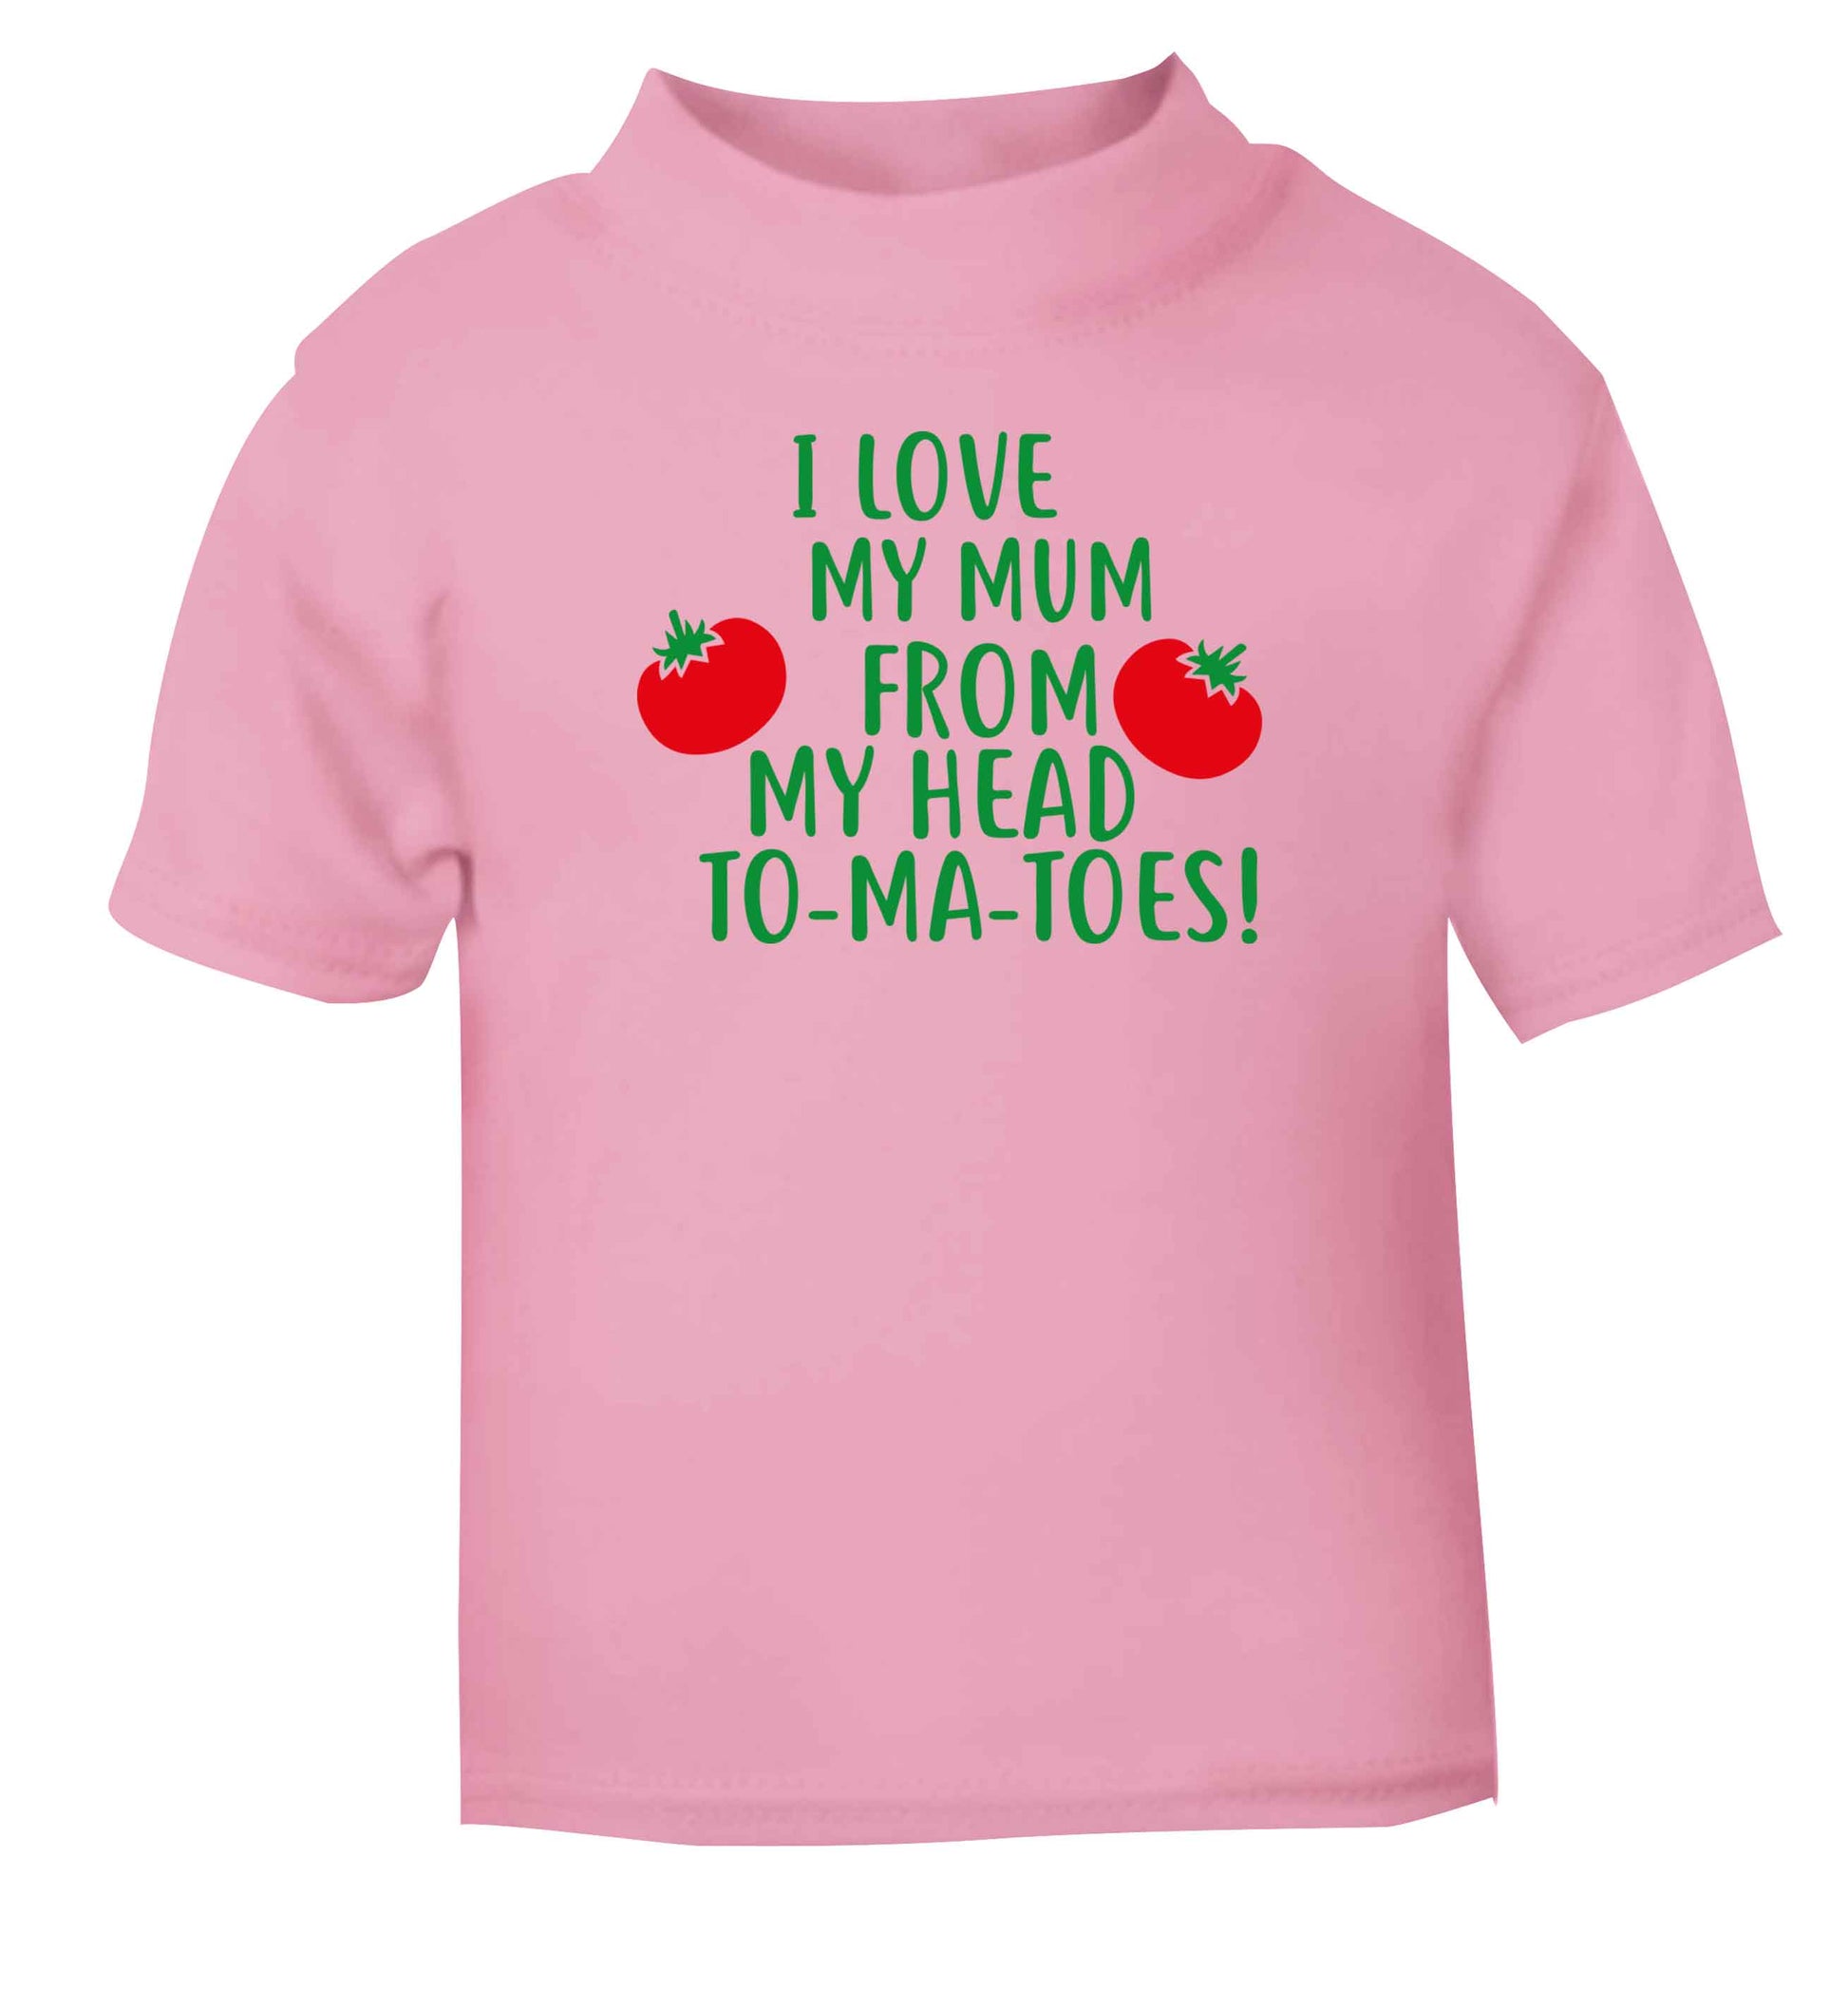 I love my mum from my head to-my-toes! light pink baby toddler Tshirt 2 Years